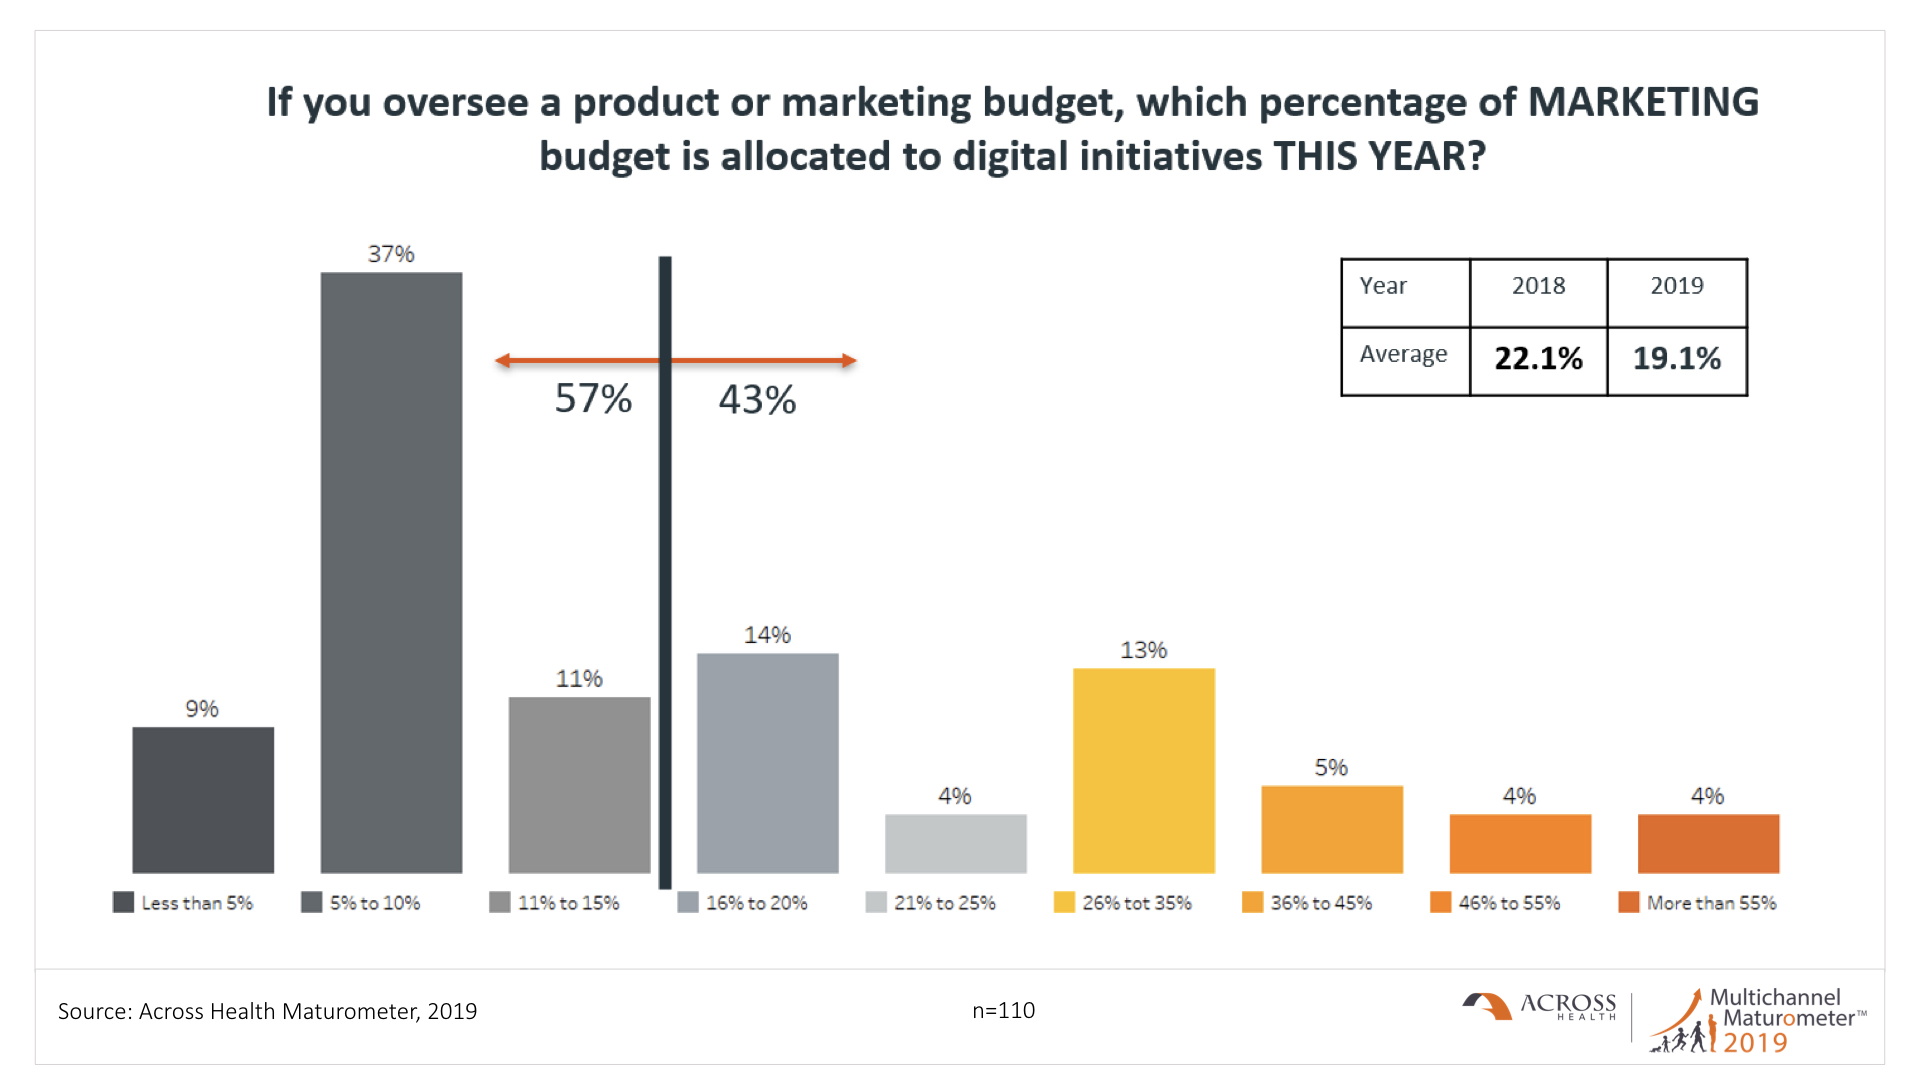 Percentage of marketing budget allocated to digital initiatives this year